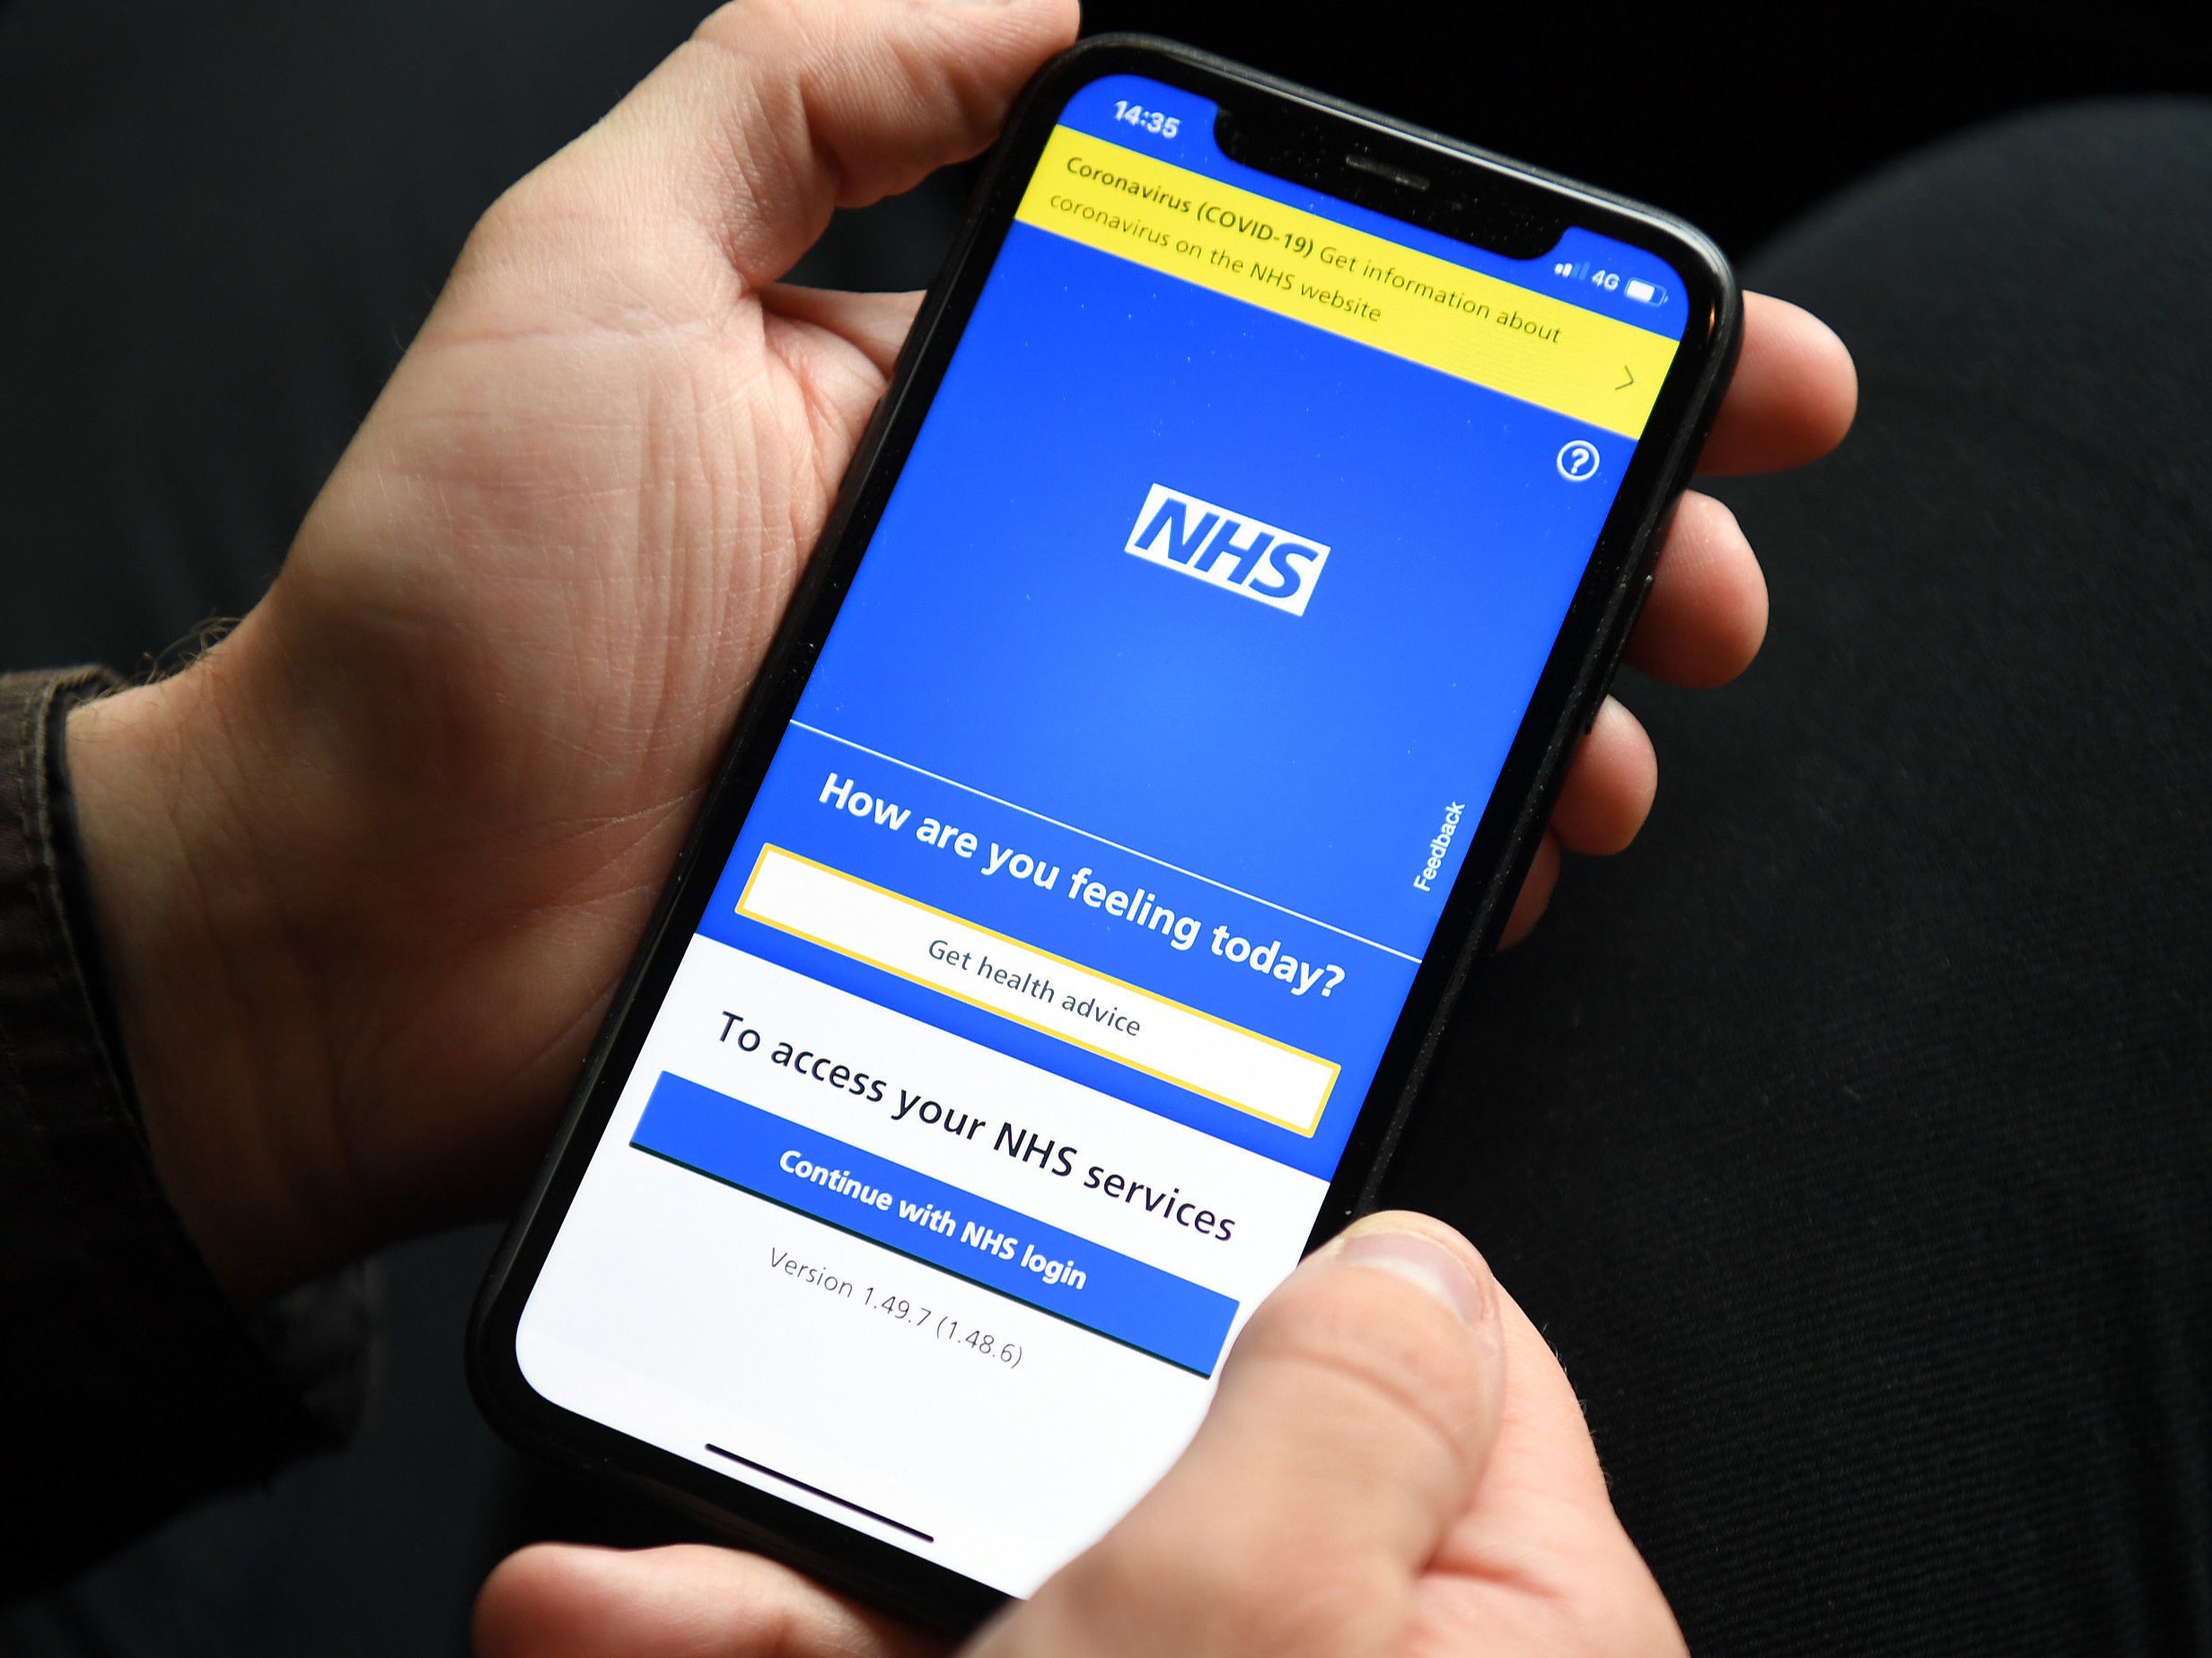 Putting vaccine passports on the NHS app could put people’s medical data at risk of being breached